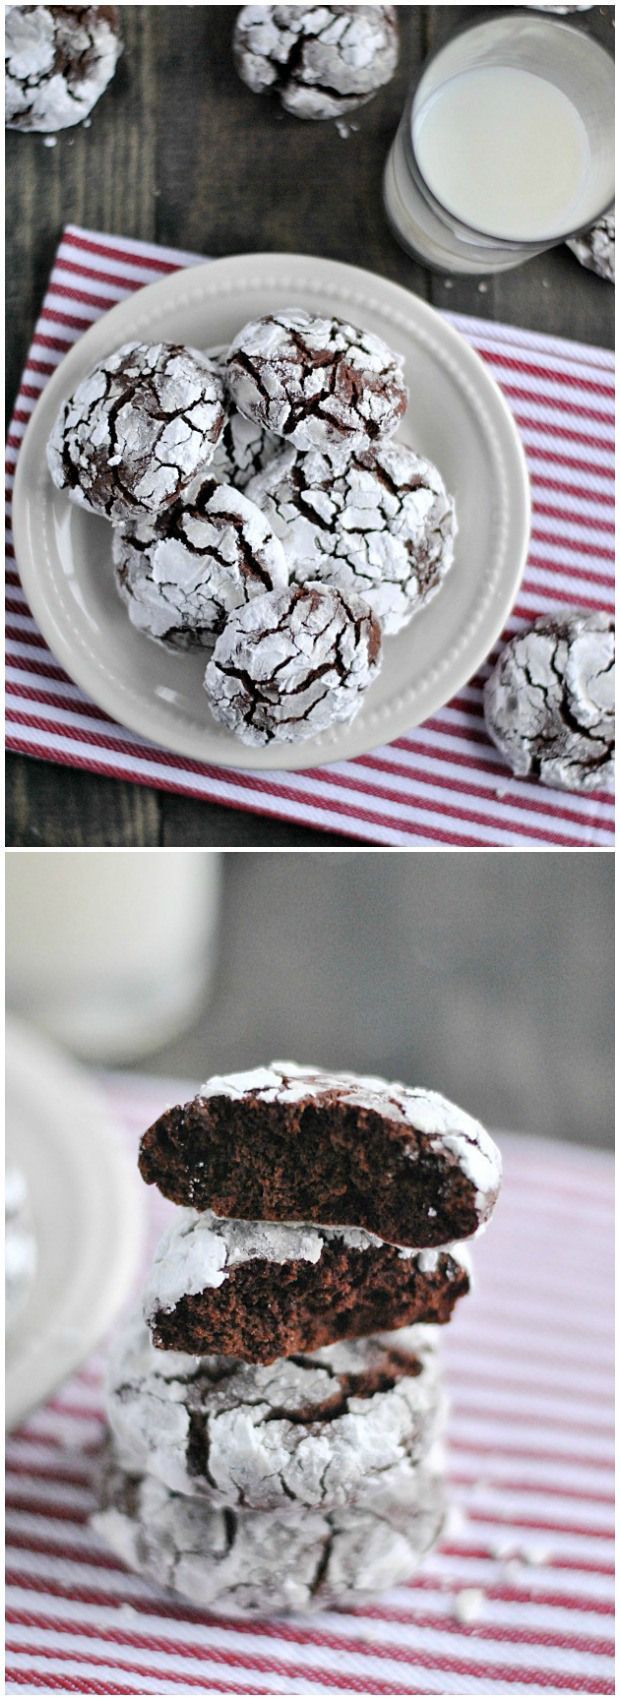 Chocolate Crinkle cookie are easy, delicious, and always a family favorite!